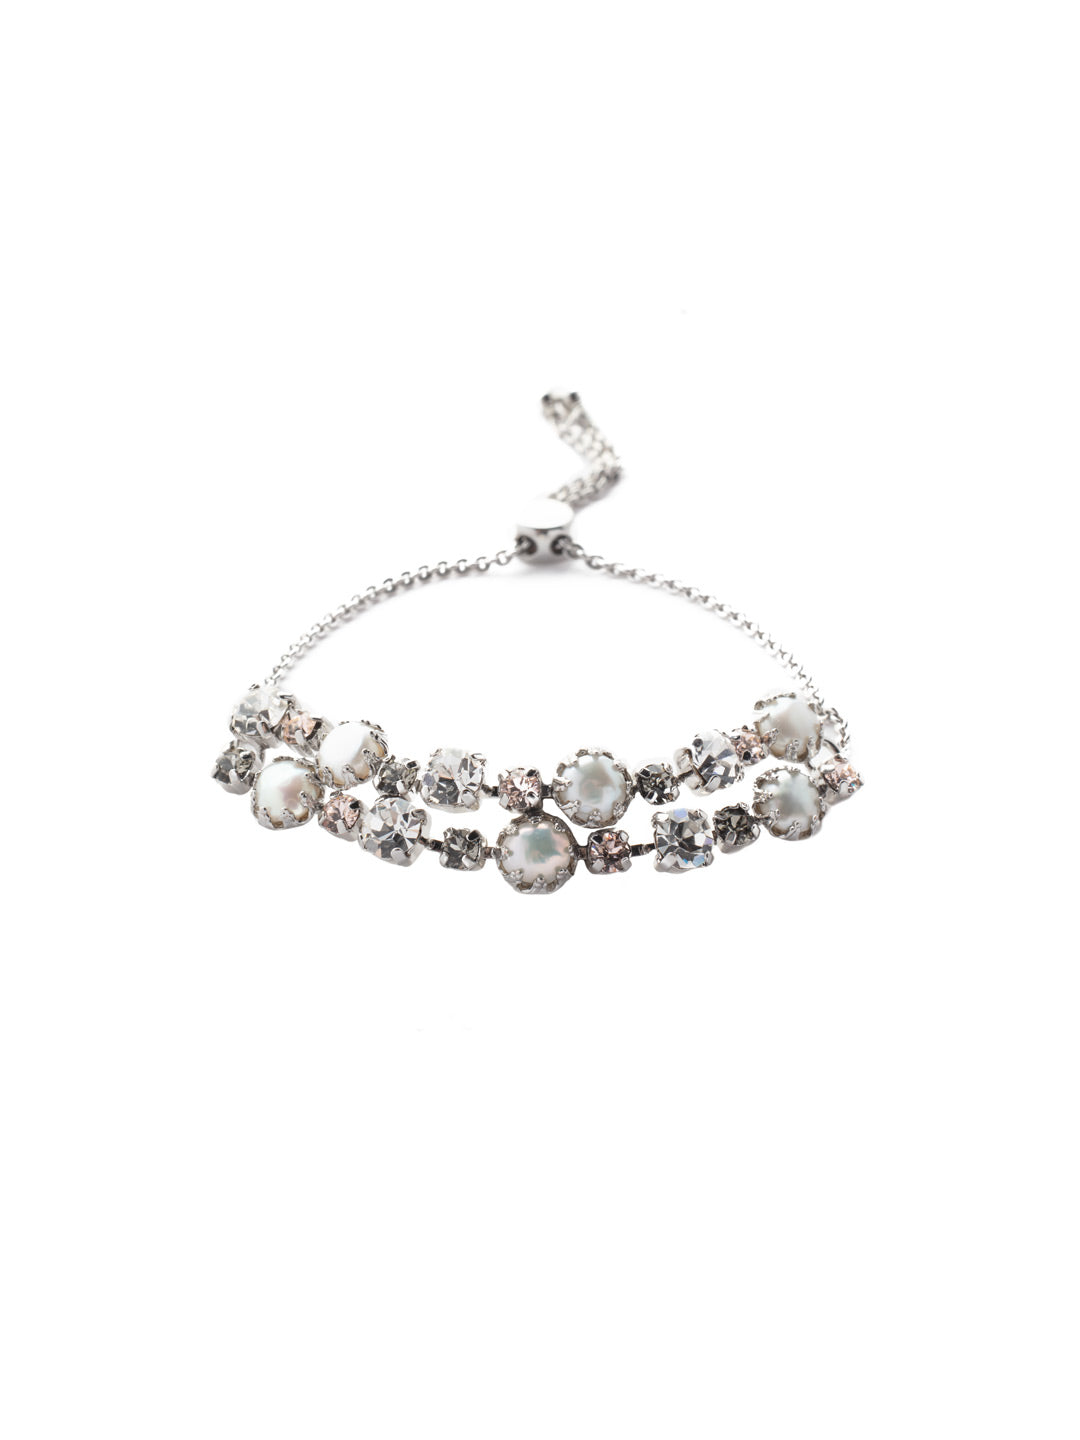 Arbor Slider Bracelet - BES120PDSNB - The Arbor Slider Bracelet is boldly stylish with two stacked layers of assorted crystals and freshwater pearls. From Sorrelli's Snow Bunny collection in our Palladium finish.